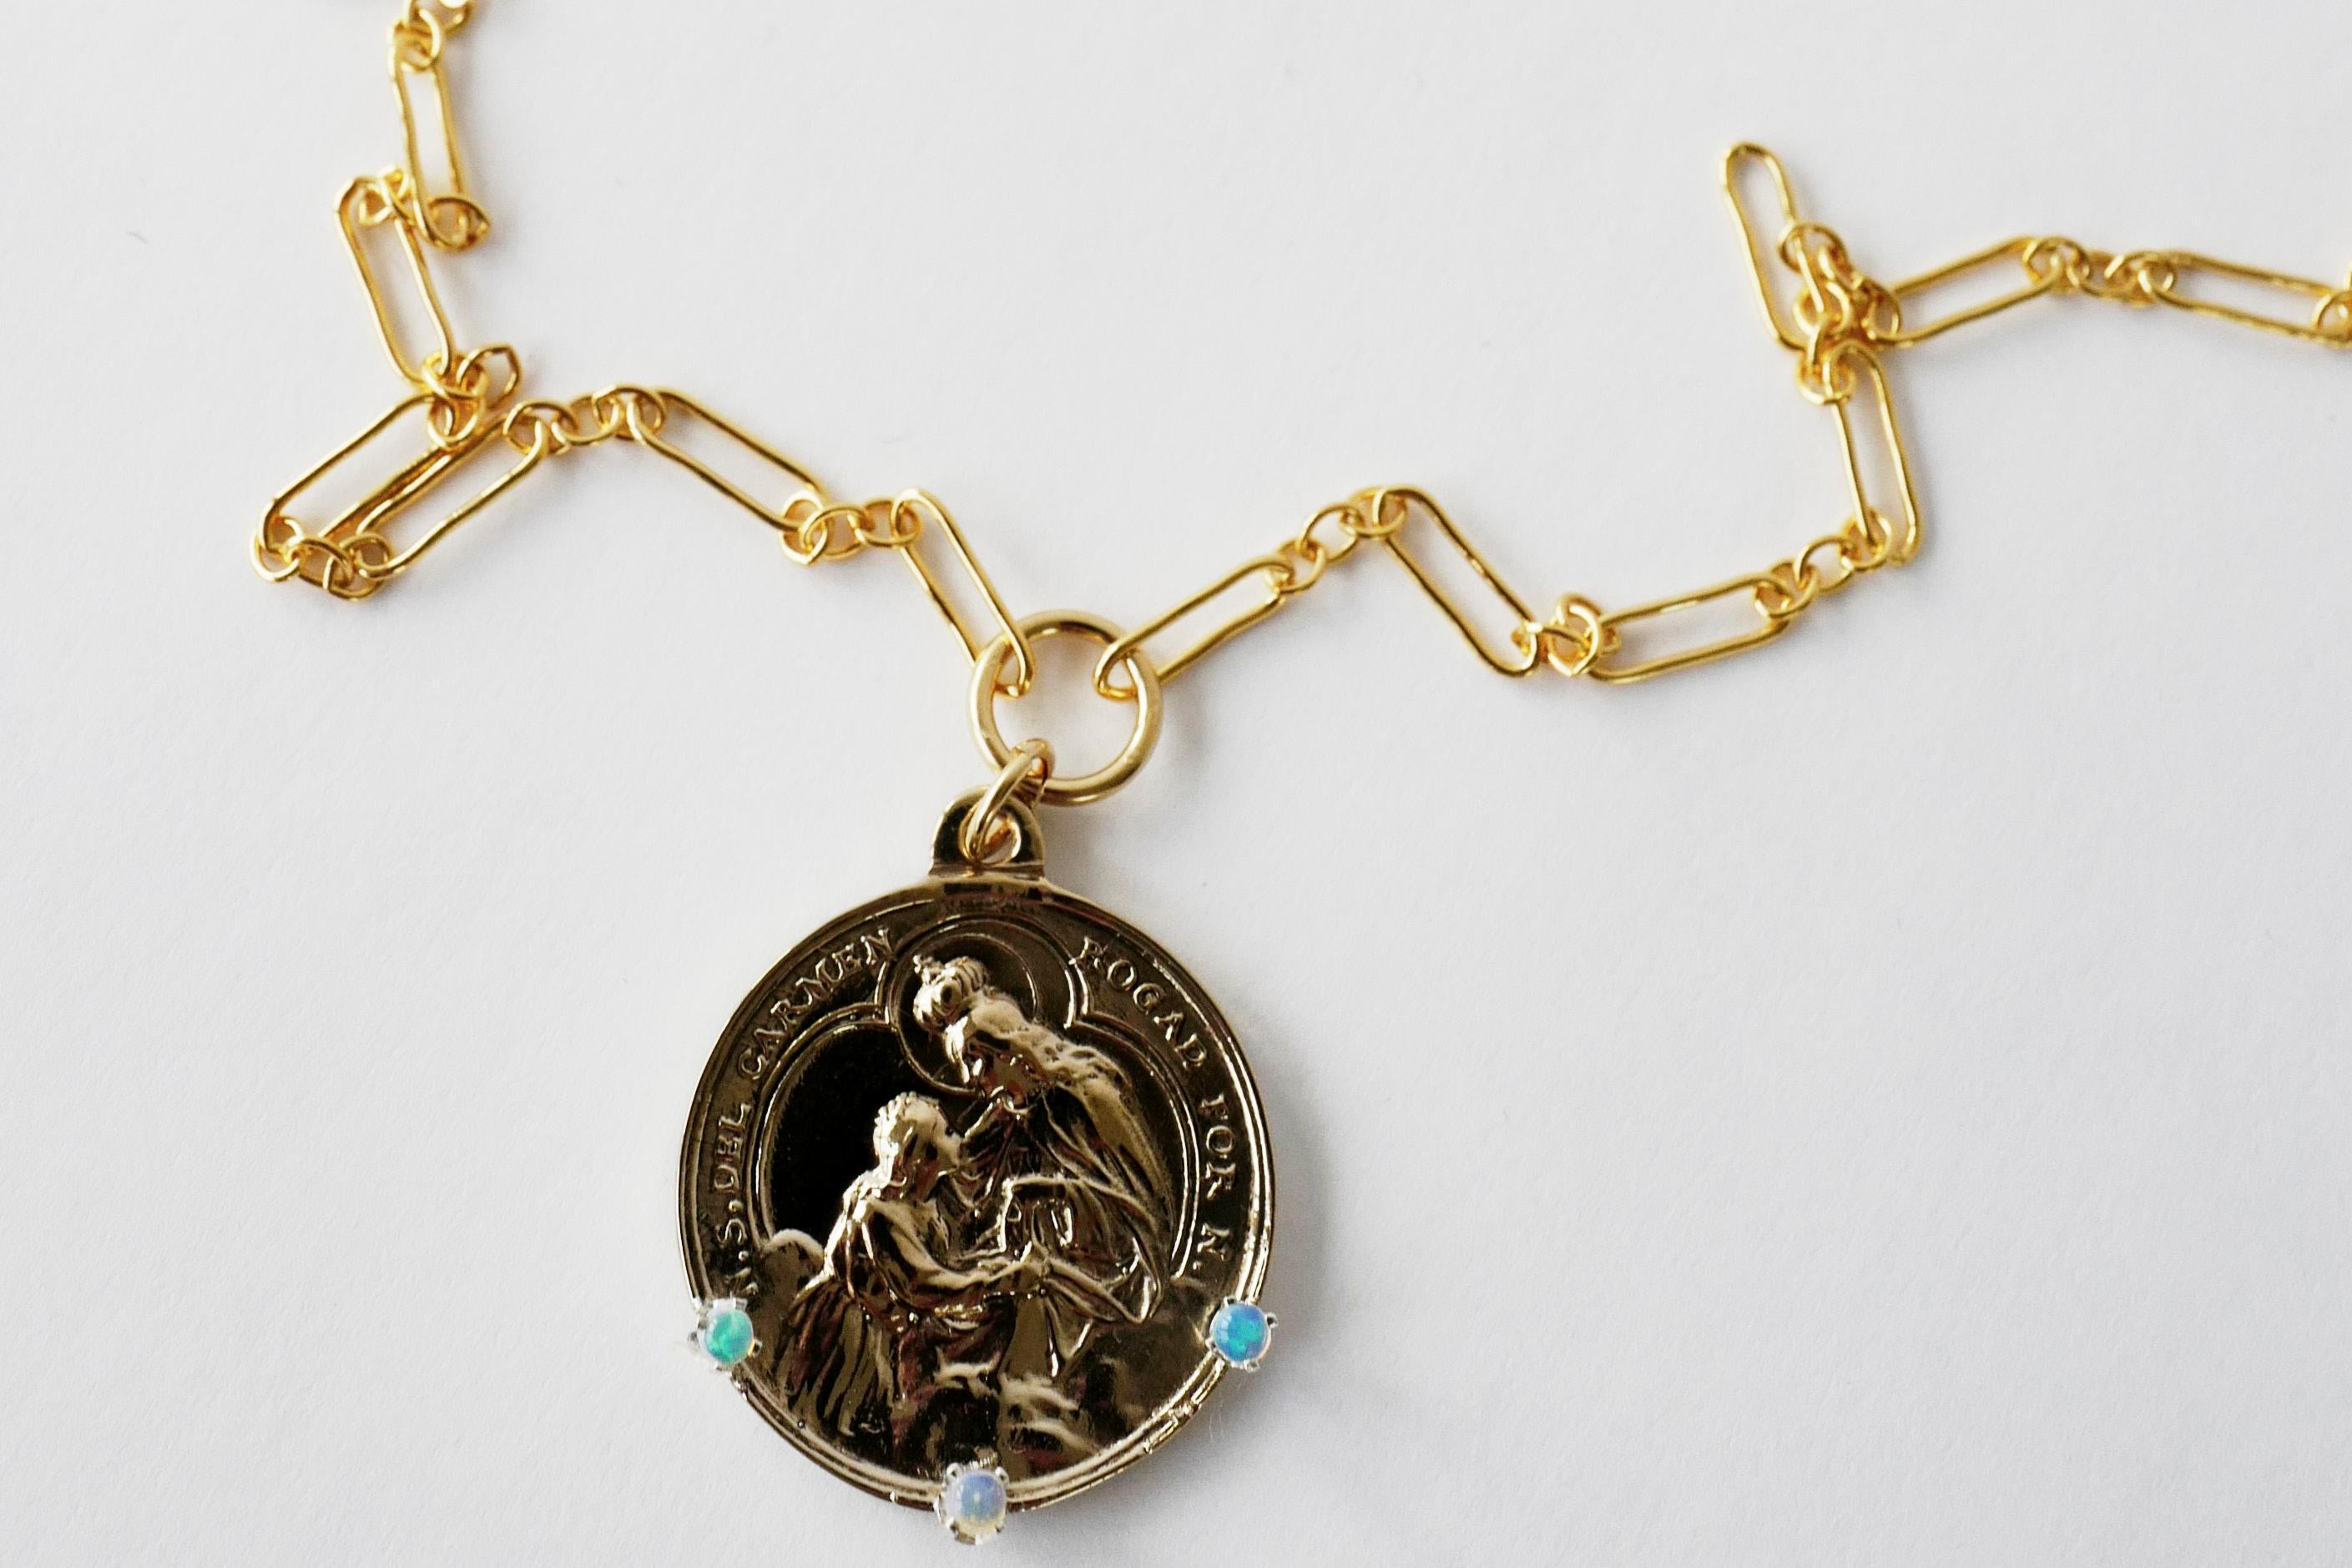 Round Cut Opal Medal Long Chain Necklace Virgin Mary Pendant Gold Vermeil J Dauphin For Sale